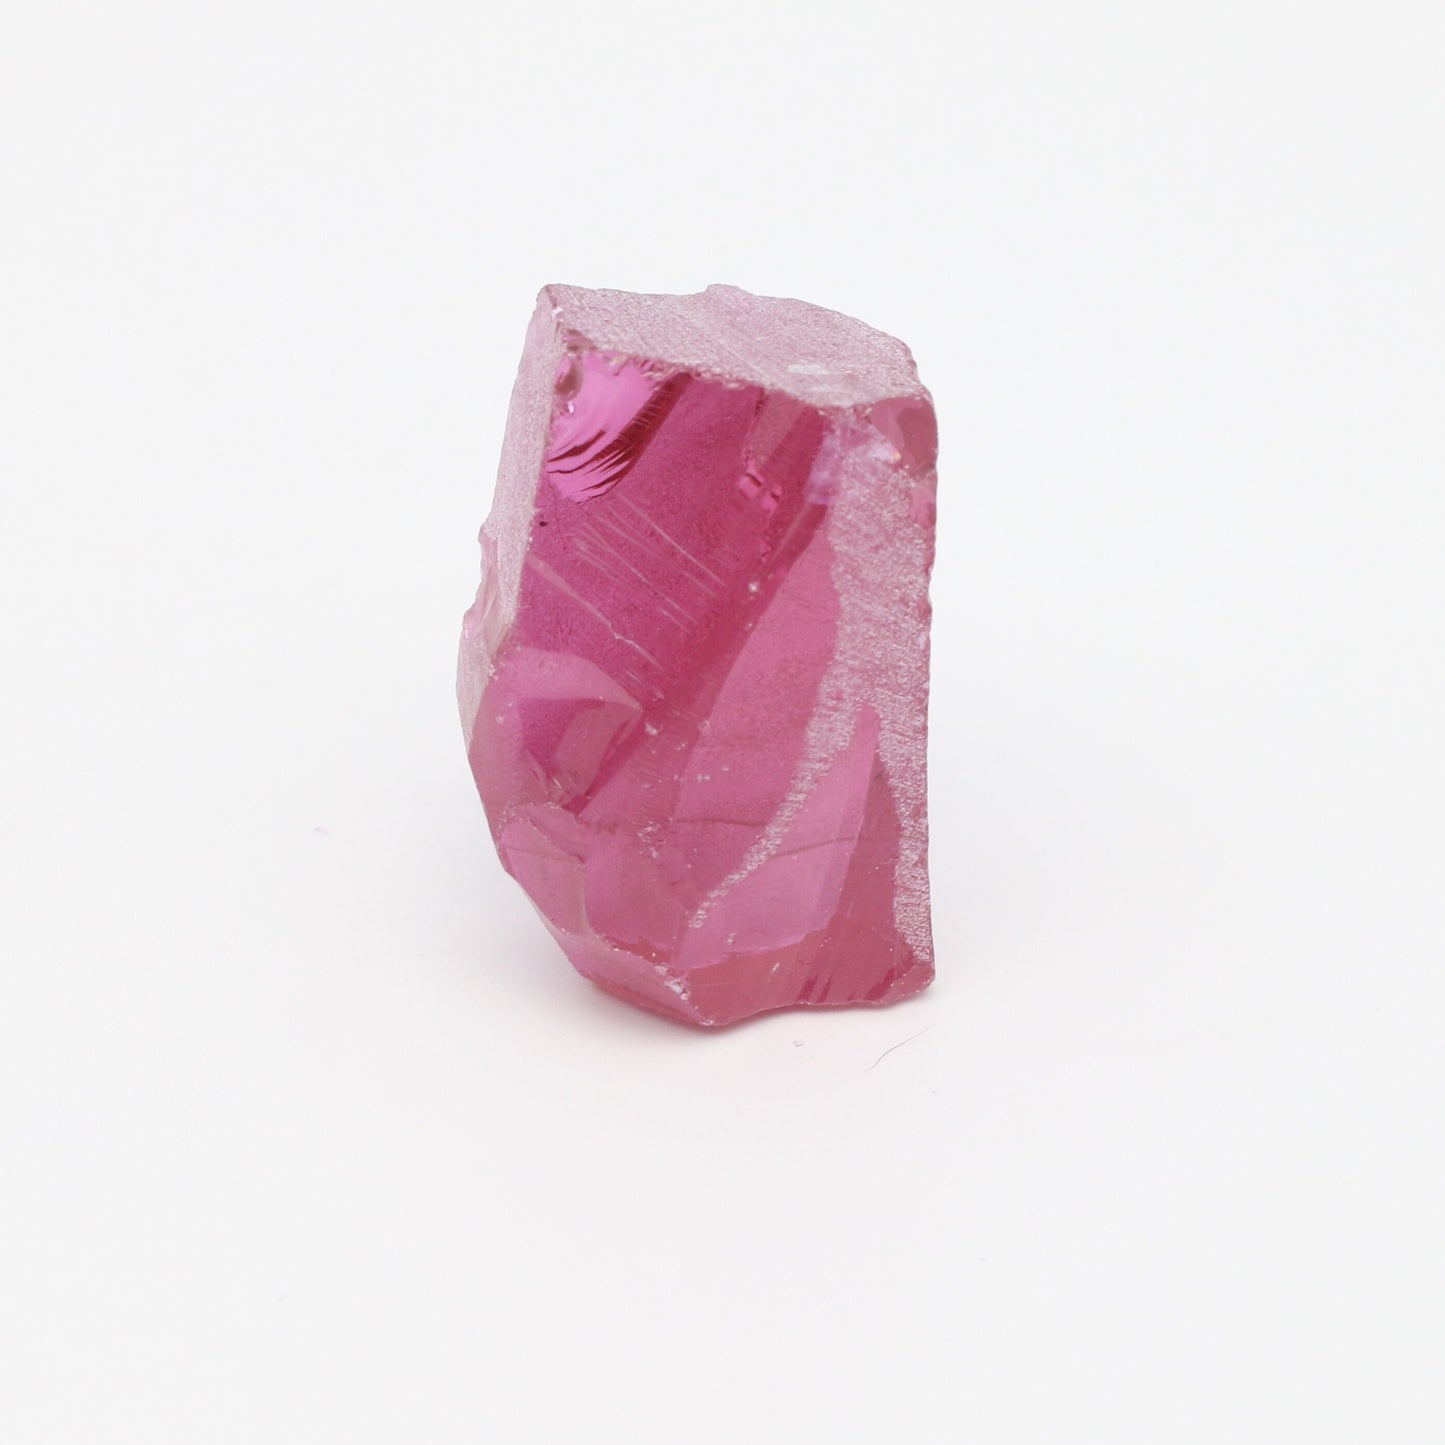 Hot Pink Tourmaline Nanosital Synthetic Lab Created Faceting Rough for Gem Cutting - #A-9095 - Various Sizes